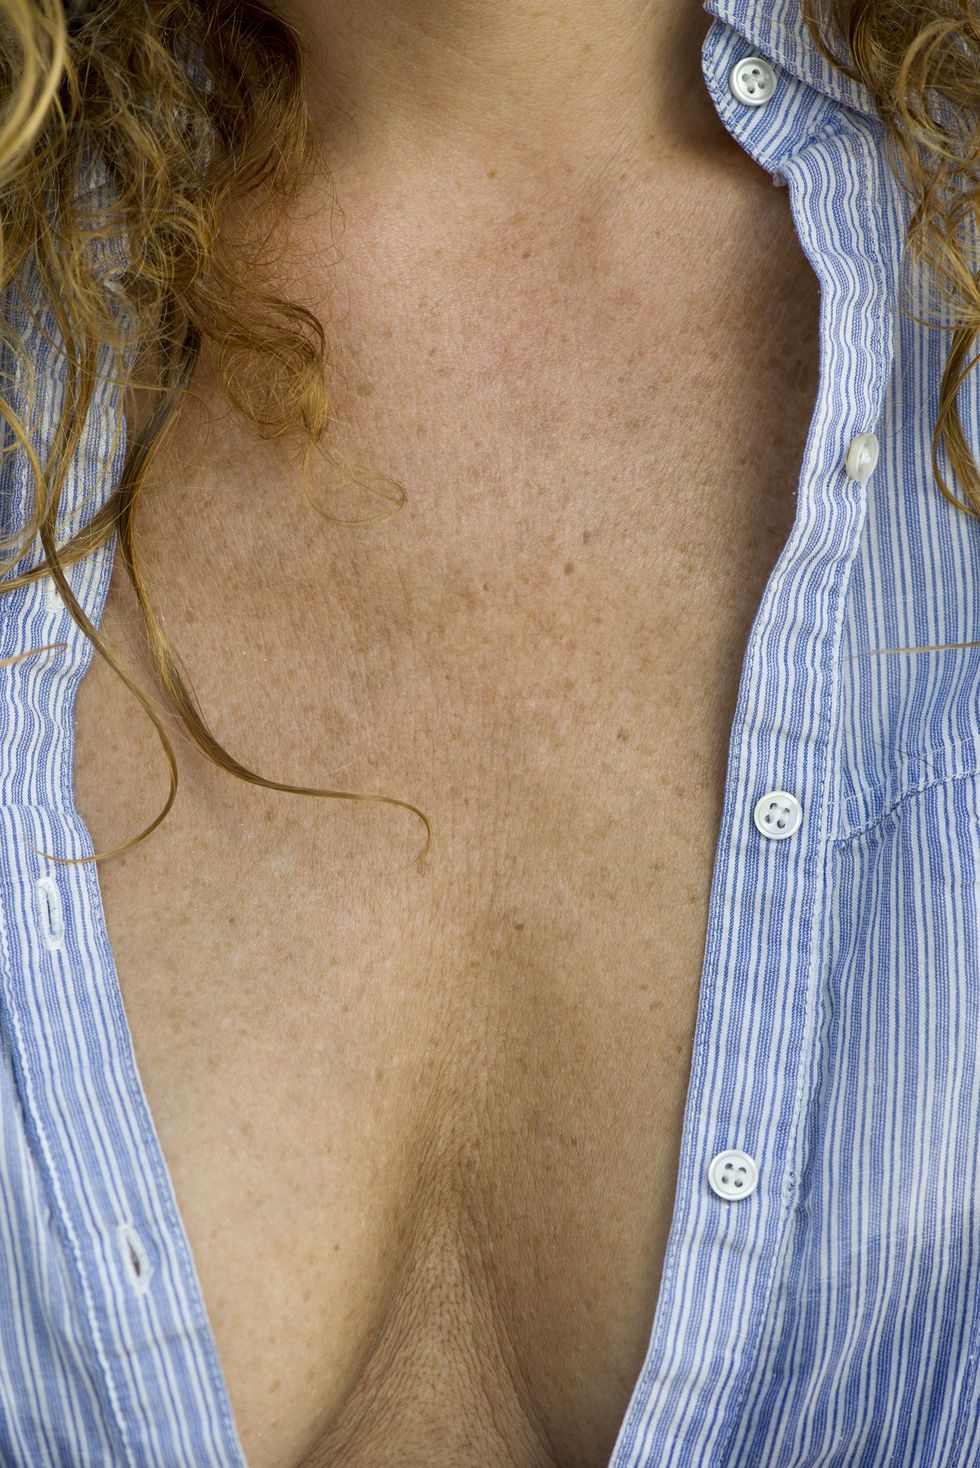 close up of mature woman's chest and cleavage